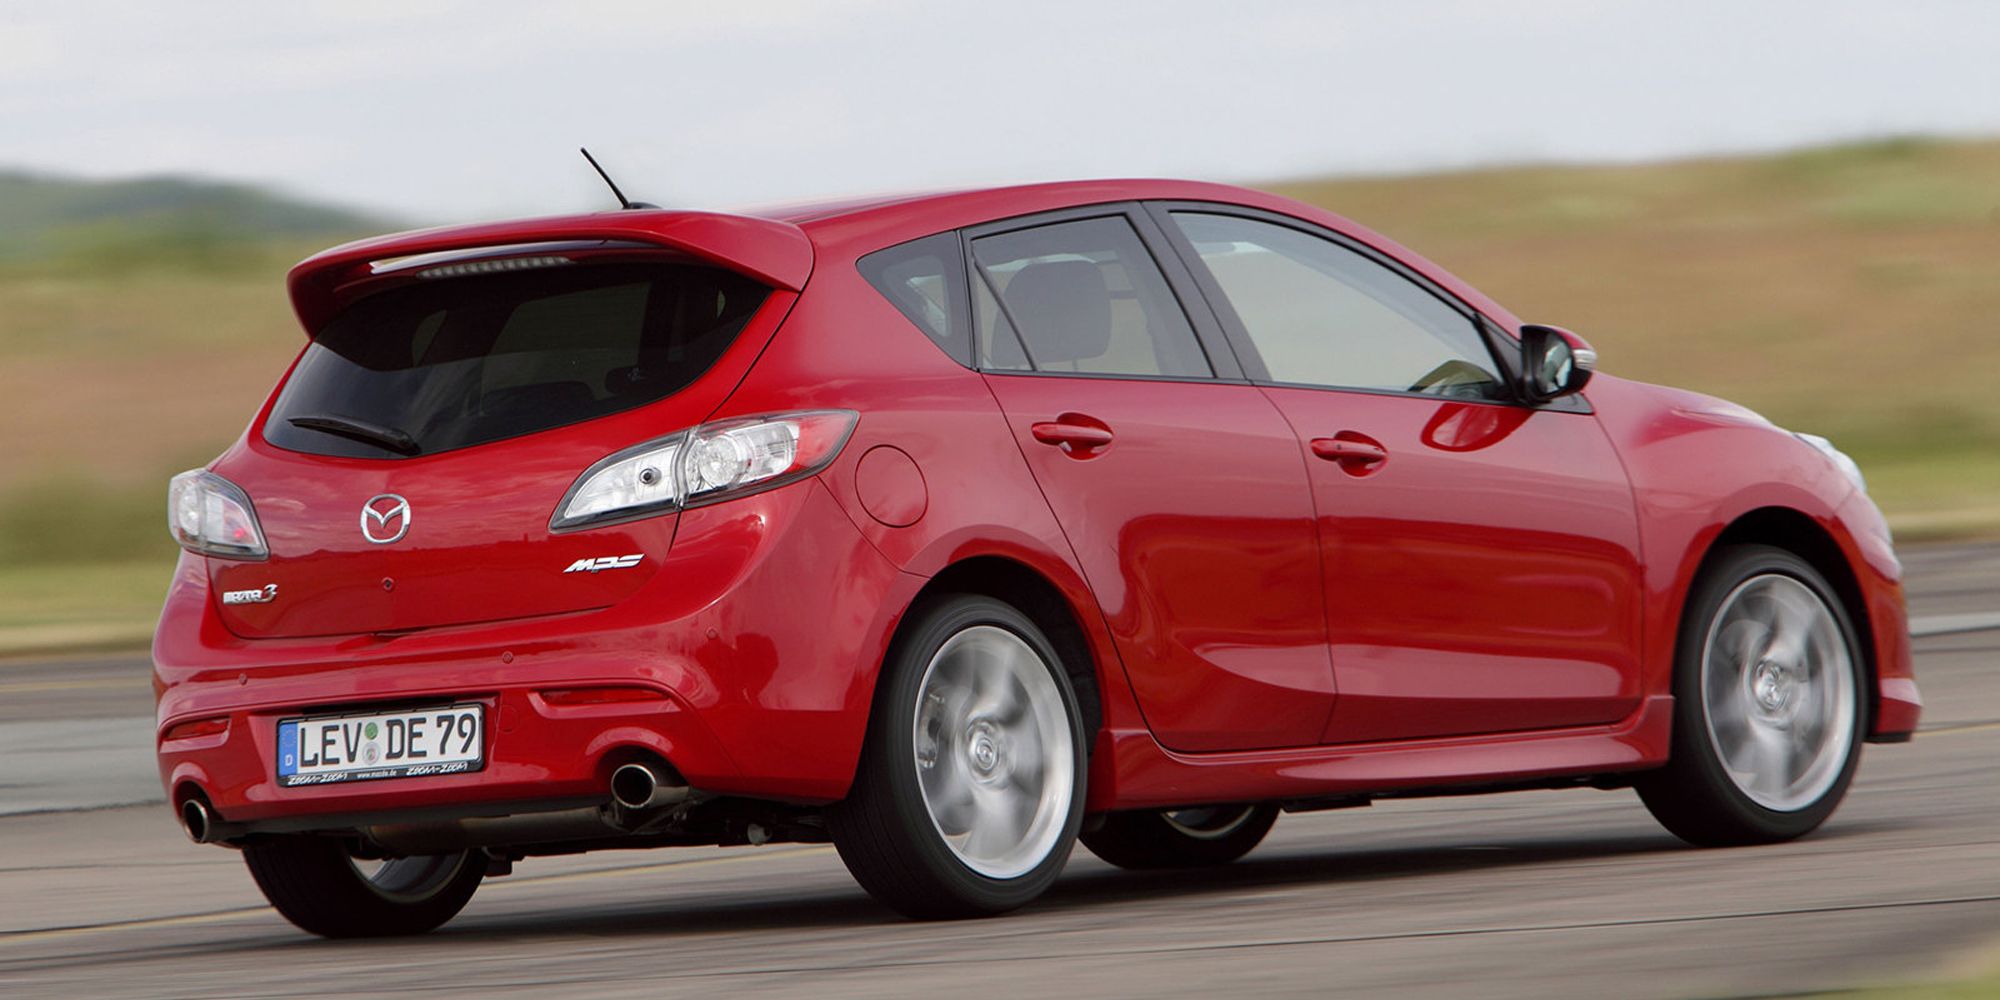 Rear 3/4 view of the Mazdaspeed 3 on the move